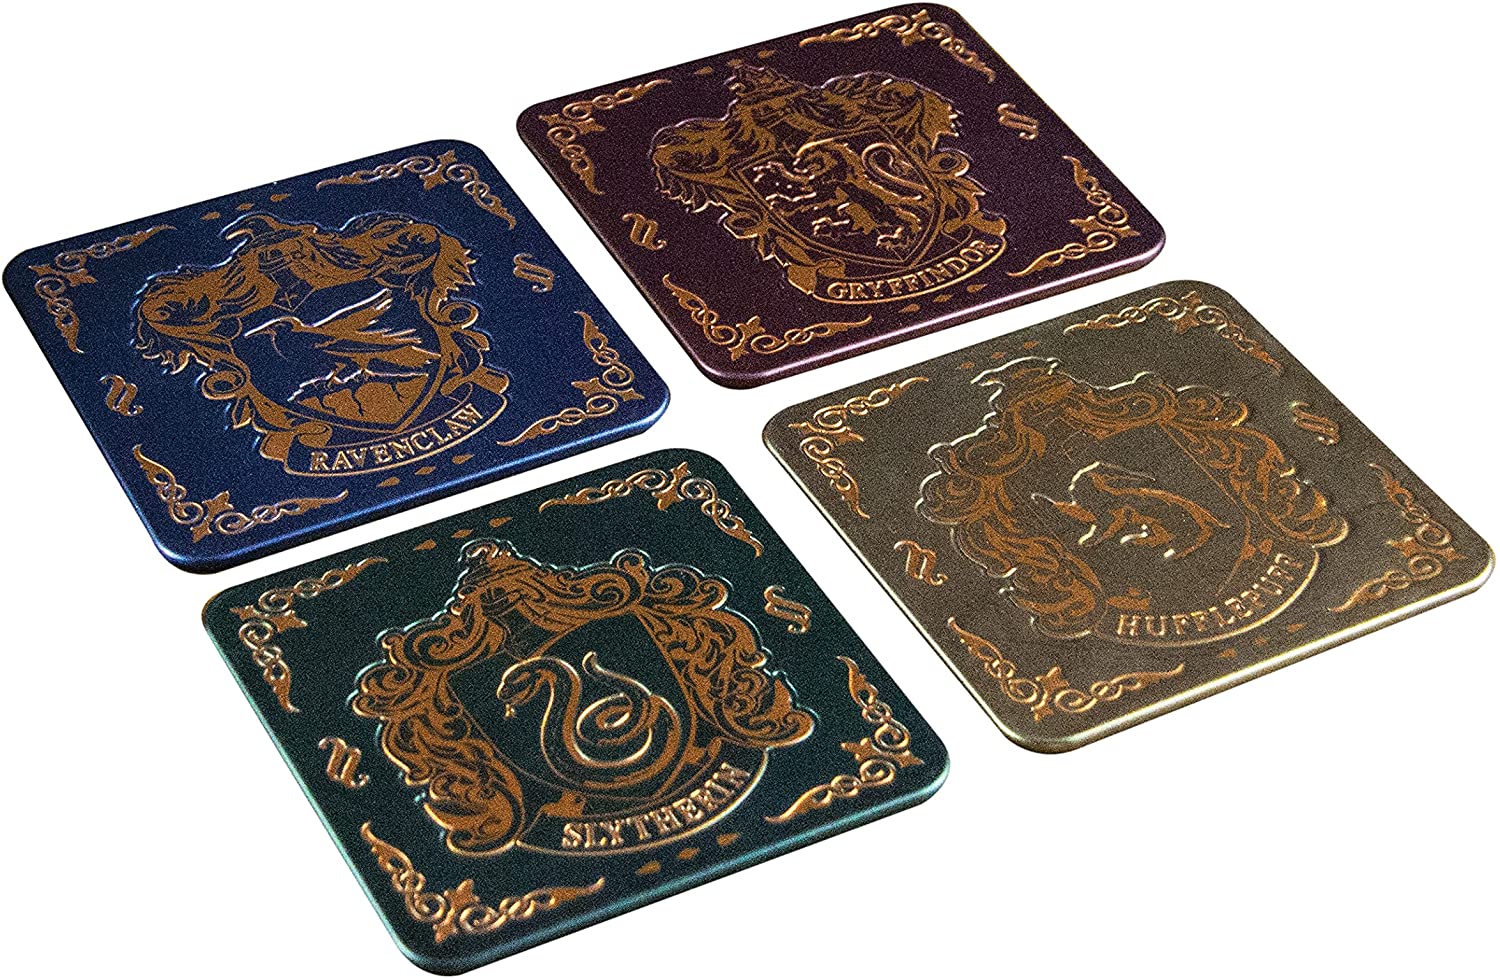 Harry Potter Metal Coasters for Drink | Harry Potter gift ideas | cool Harry Potter gift ideas | magical Harry Potter gift ideas | cute Harry Potter gift ideas | what to gift a harry potter fan | what is the best gift for a harry potter fan | the ultimate harry potter gift | the best harry potter gift ideas | harry potter gift for girl | harry potter gift for teacher | harry potter gift for kids | harry potter gift to buy | harry potter gift for adults | harry potter gift for him | harry potter gift for her | harry potter gift for boyfriend | harry potter gift for girlfriend | harry potter gift amazon | harry potter anniversary gift | harry potter gift bag ideas | harry potter gift box ideas | harry potter gift guide | harry potter official gift shop | harry potter gift set | Harry Potter gift guide | the best harry potter gift ideas | what to get someone who loves harry potter | harry potter hufflepuff gift ideas | harry potter Gryffindor gift ideas | harry potter Ravenclaw gift ideas | harry potter Slytherin gift ideas | harry potter graduation gift ideas | good harry potter gift ideas | great harry potter gift ideas | harry potter baby shower gift ideas | harry potter themed wedding gift ideas | unique harry potter gift ideas | harry potter valentines gift ideas | potterhead gift ideas | best potterhead gifts | cool potterhead gift ideas | Harry Potter gifts for men | Harry Potter gift box | Harry Potter gifts uk | harry potter gifts for tweens | harry potter gift basket | harry potter gift set | Harry Potter stocking stuffers | Harry Potter Christmas gifts | fantastic beasts gift guide